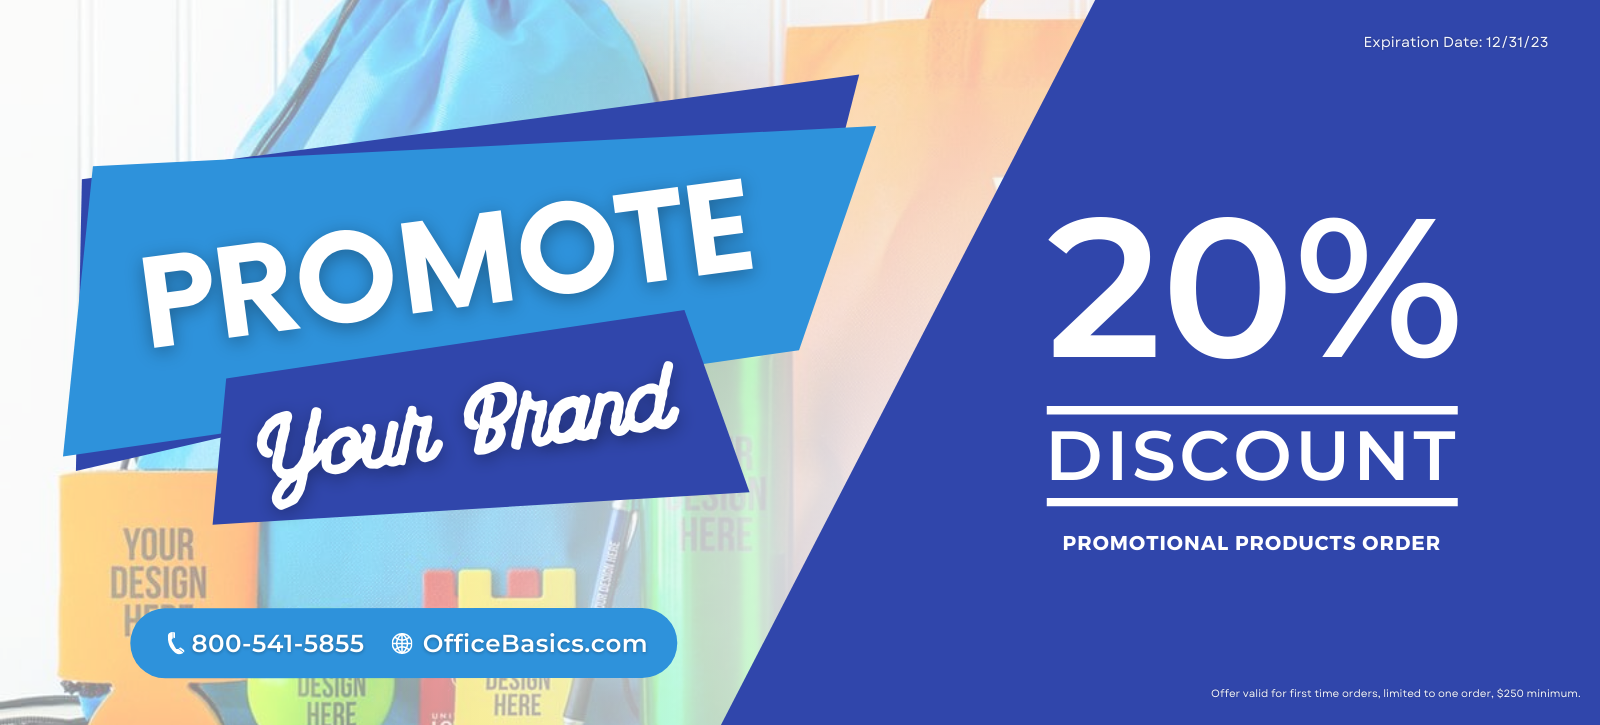 What Are The Most Popular Promotional Products of 2023?